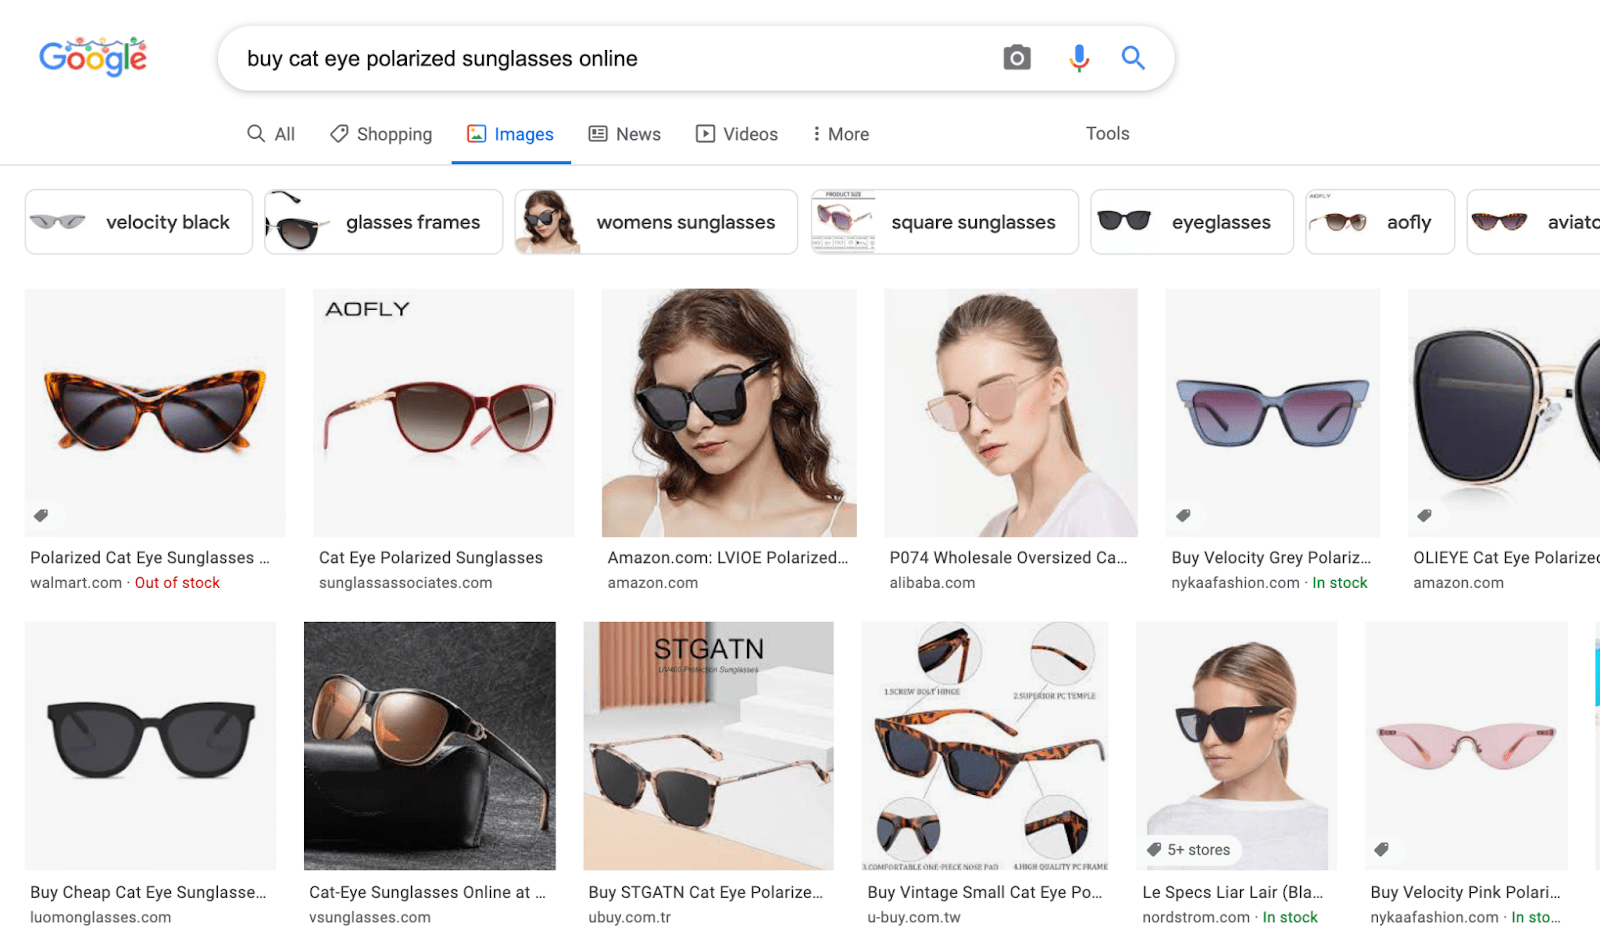 Rich images in Google SERP